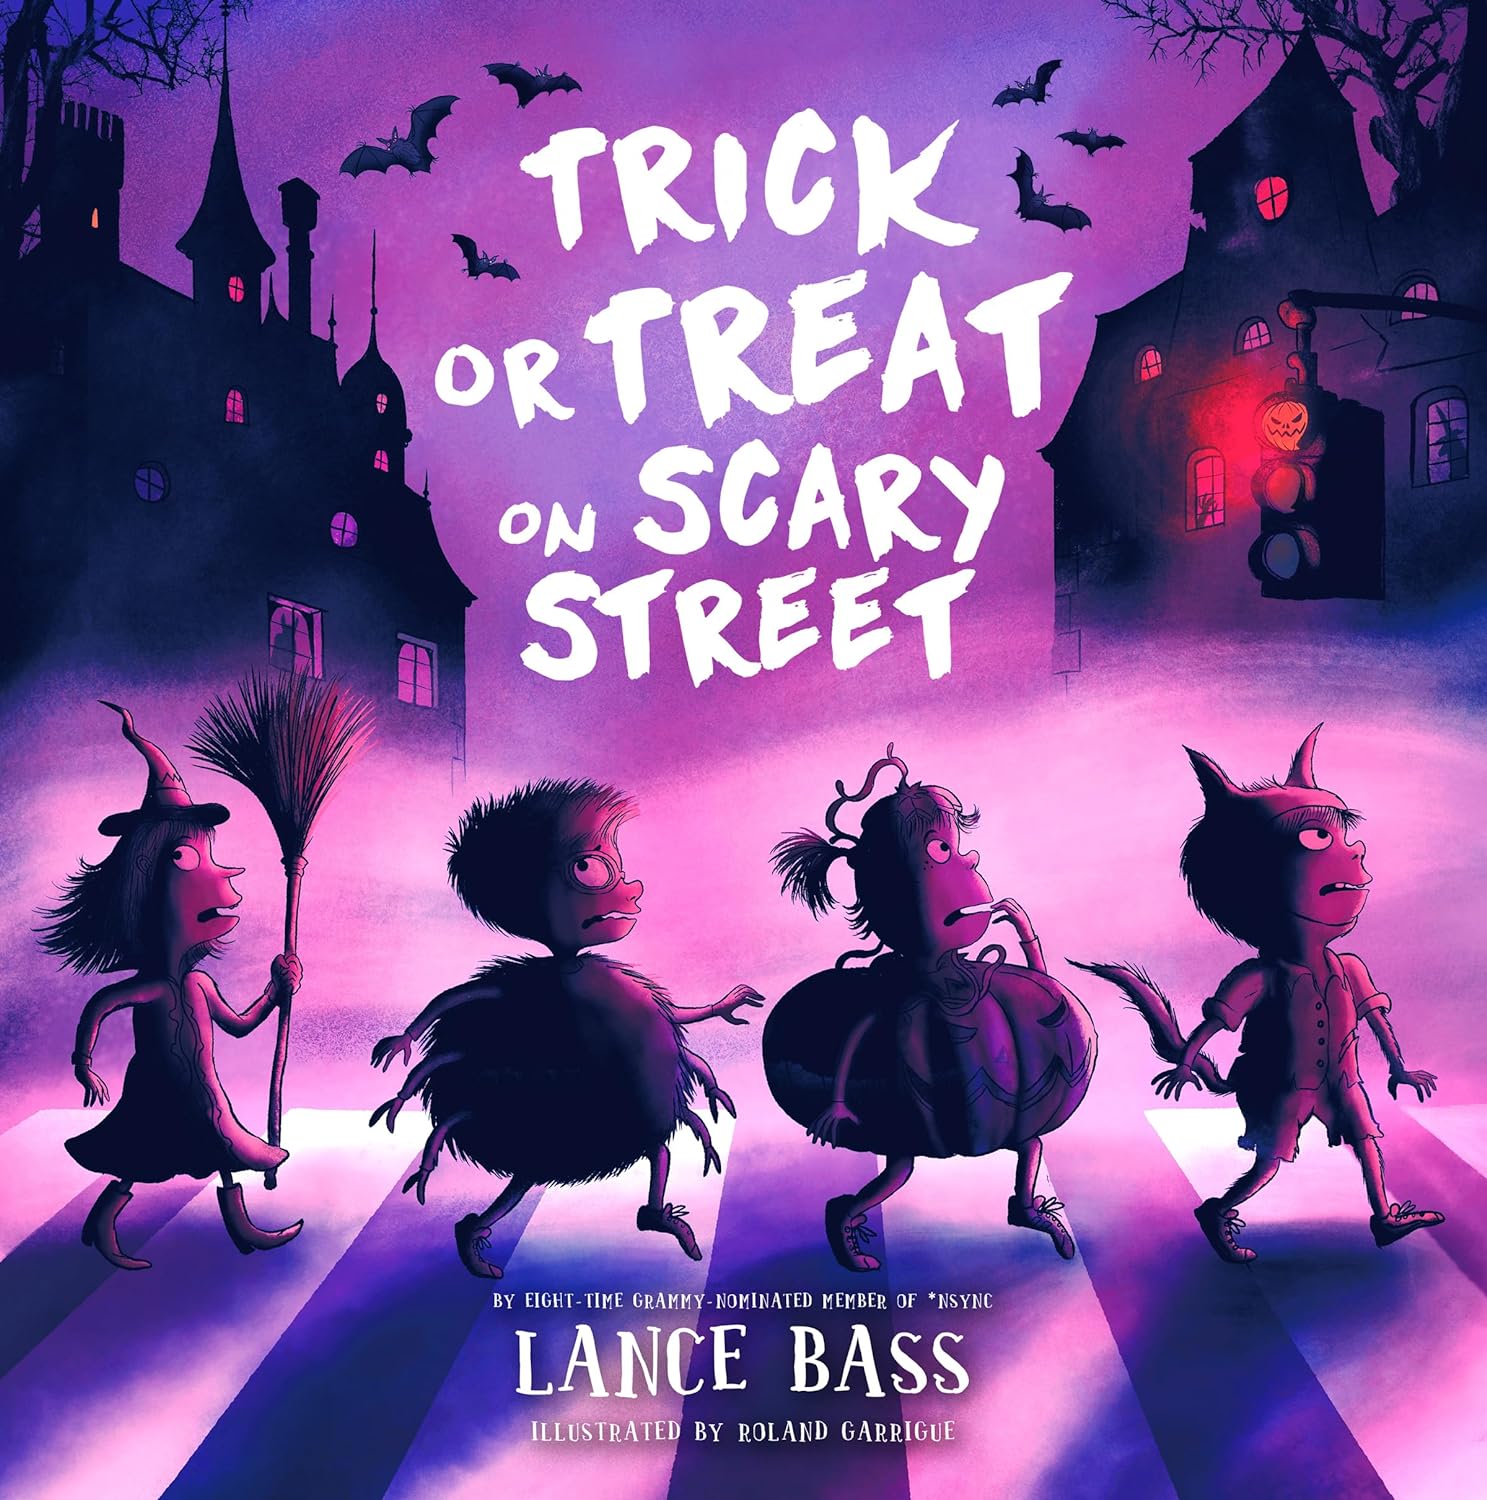 Image for "Trick Or Treat on Scary Street"